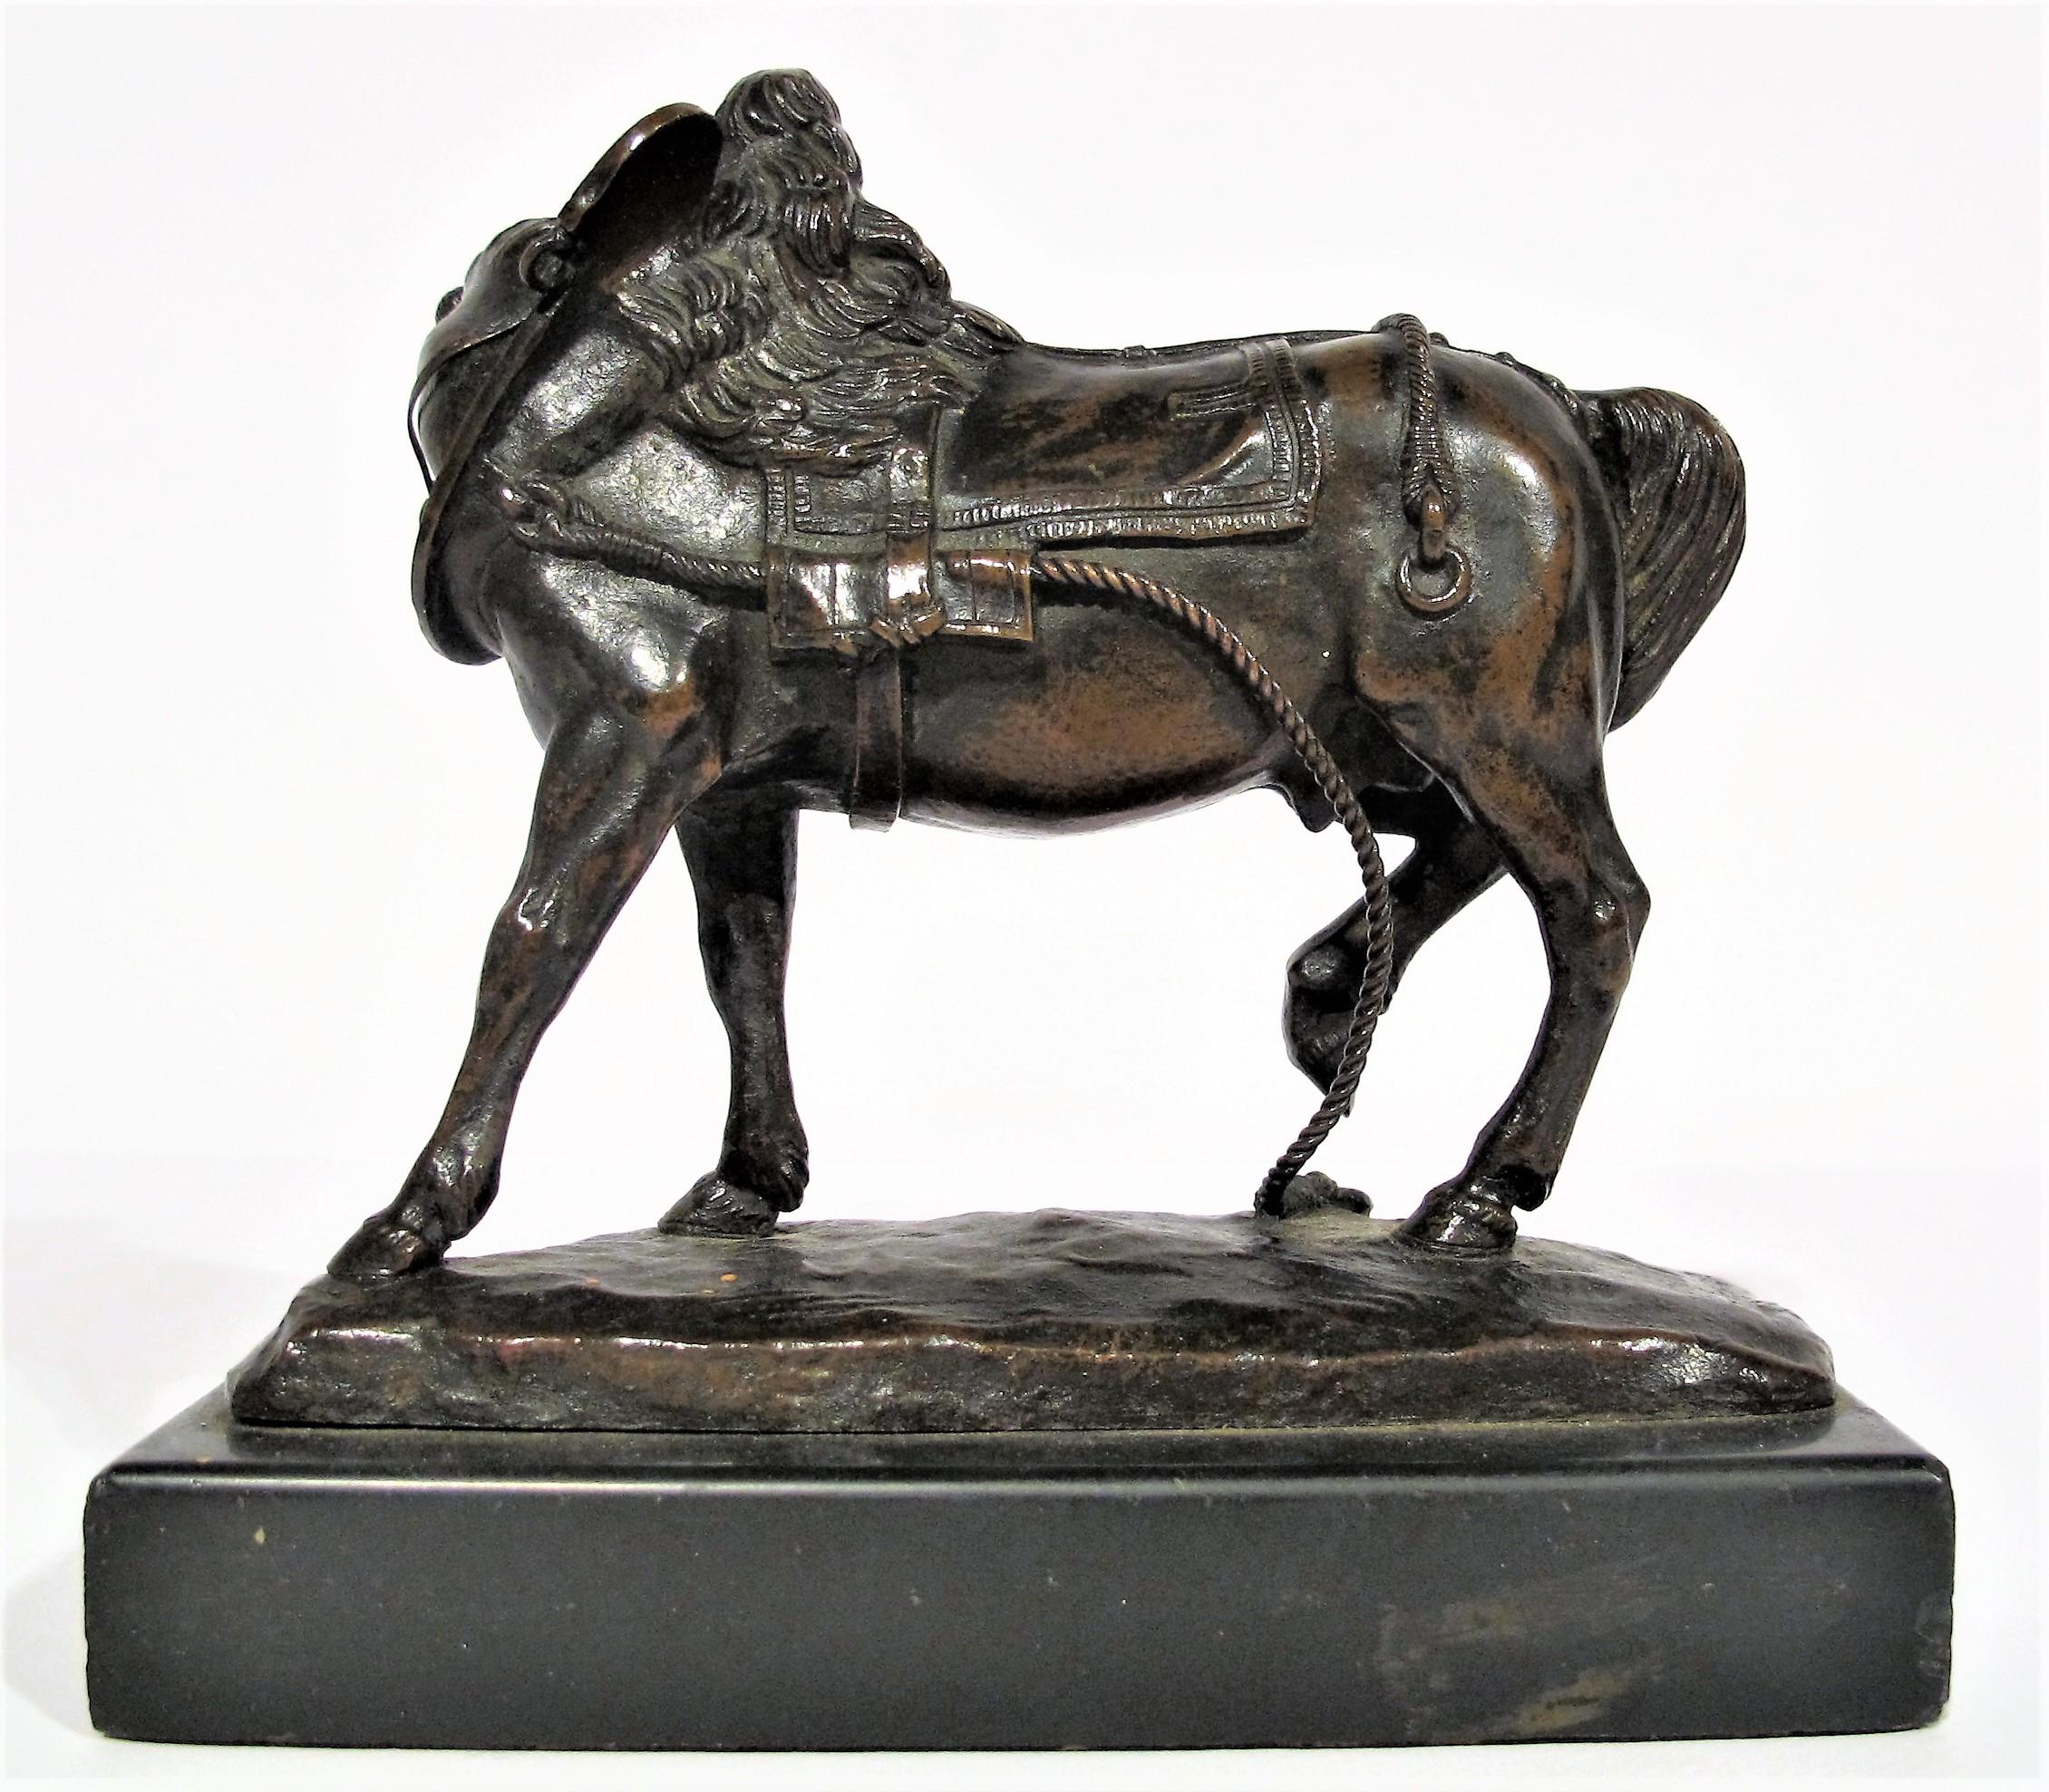 Old bronze proof made according to the sand casting method, brown patina, representing a harnassed workhorse. Signed T.Gechter on base and dated 1842. Bronze sculpture with an equestrian theme, very Fine quality., detailed chasing, lot of details